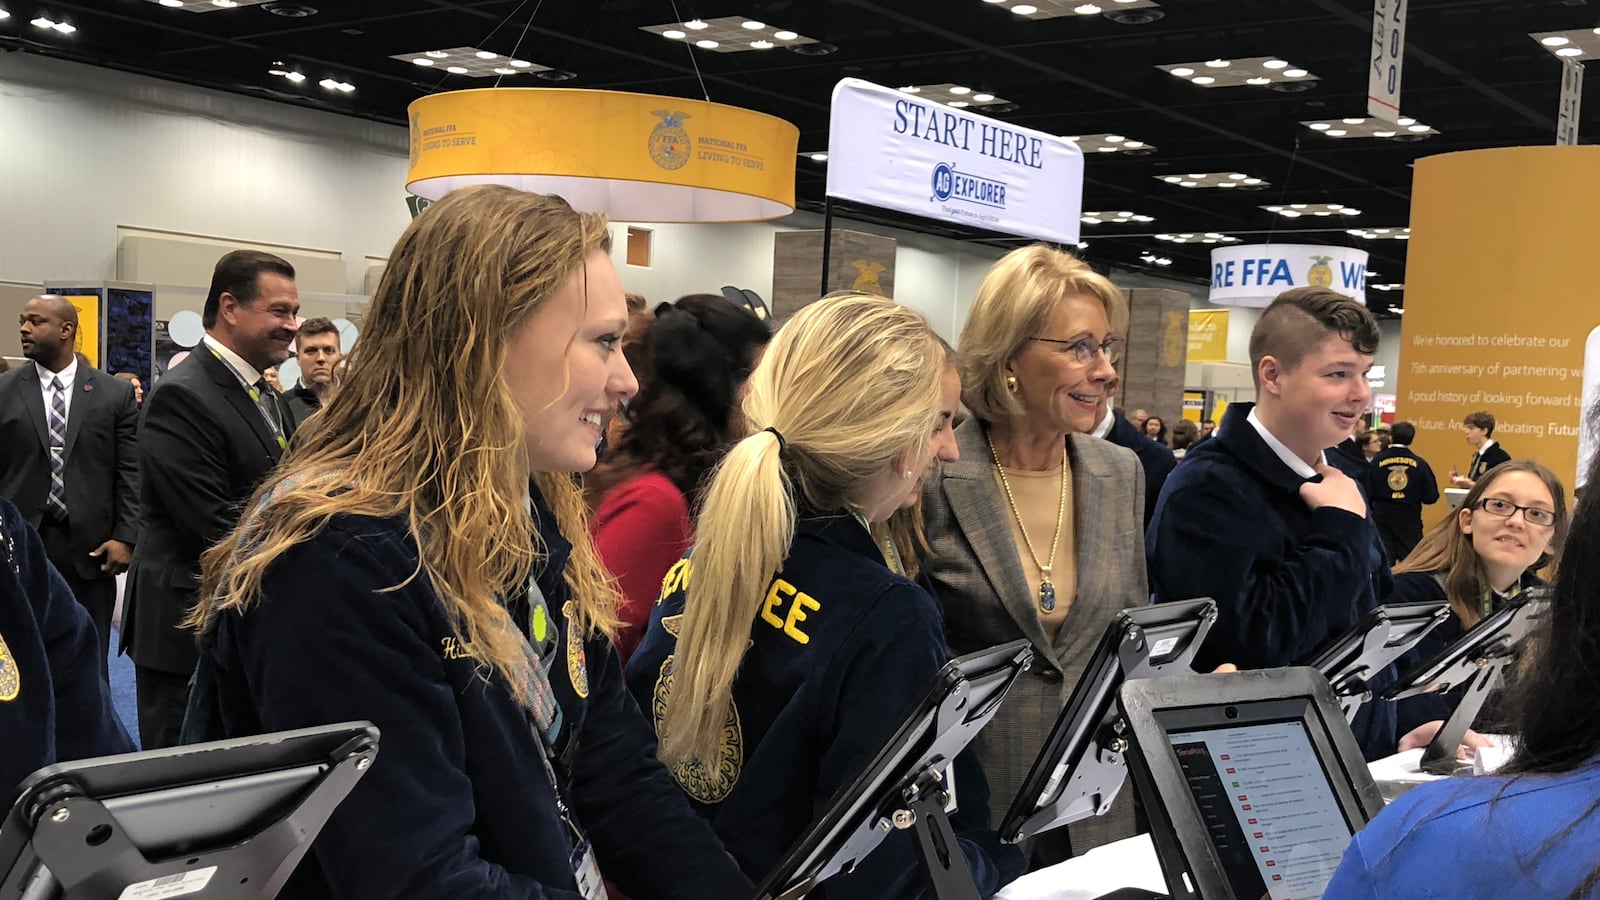 Betsy DeVos, U.S. secretary of education, tours exhibits at the annual FFA national convention in Indianapolis.